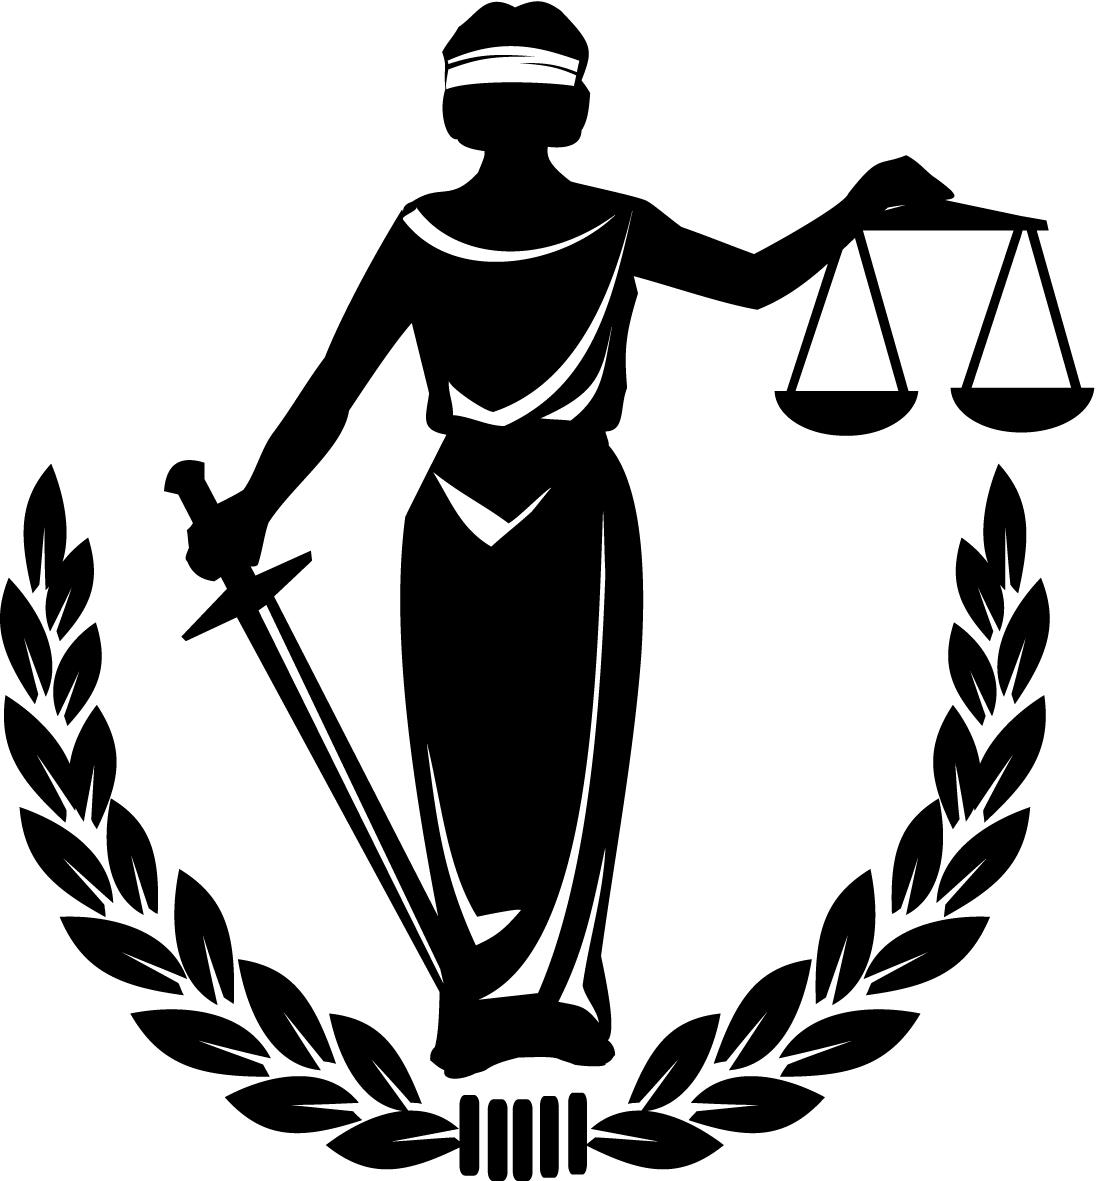 Criminal Justice Symbols Free Cliparts That You Can Download To You    